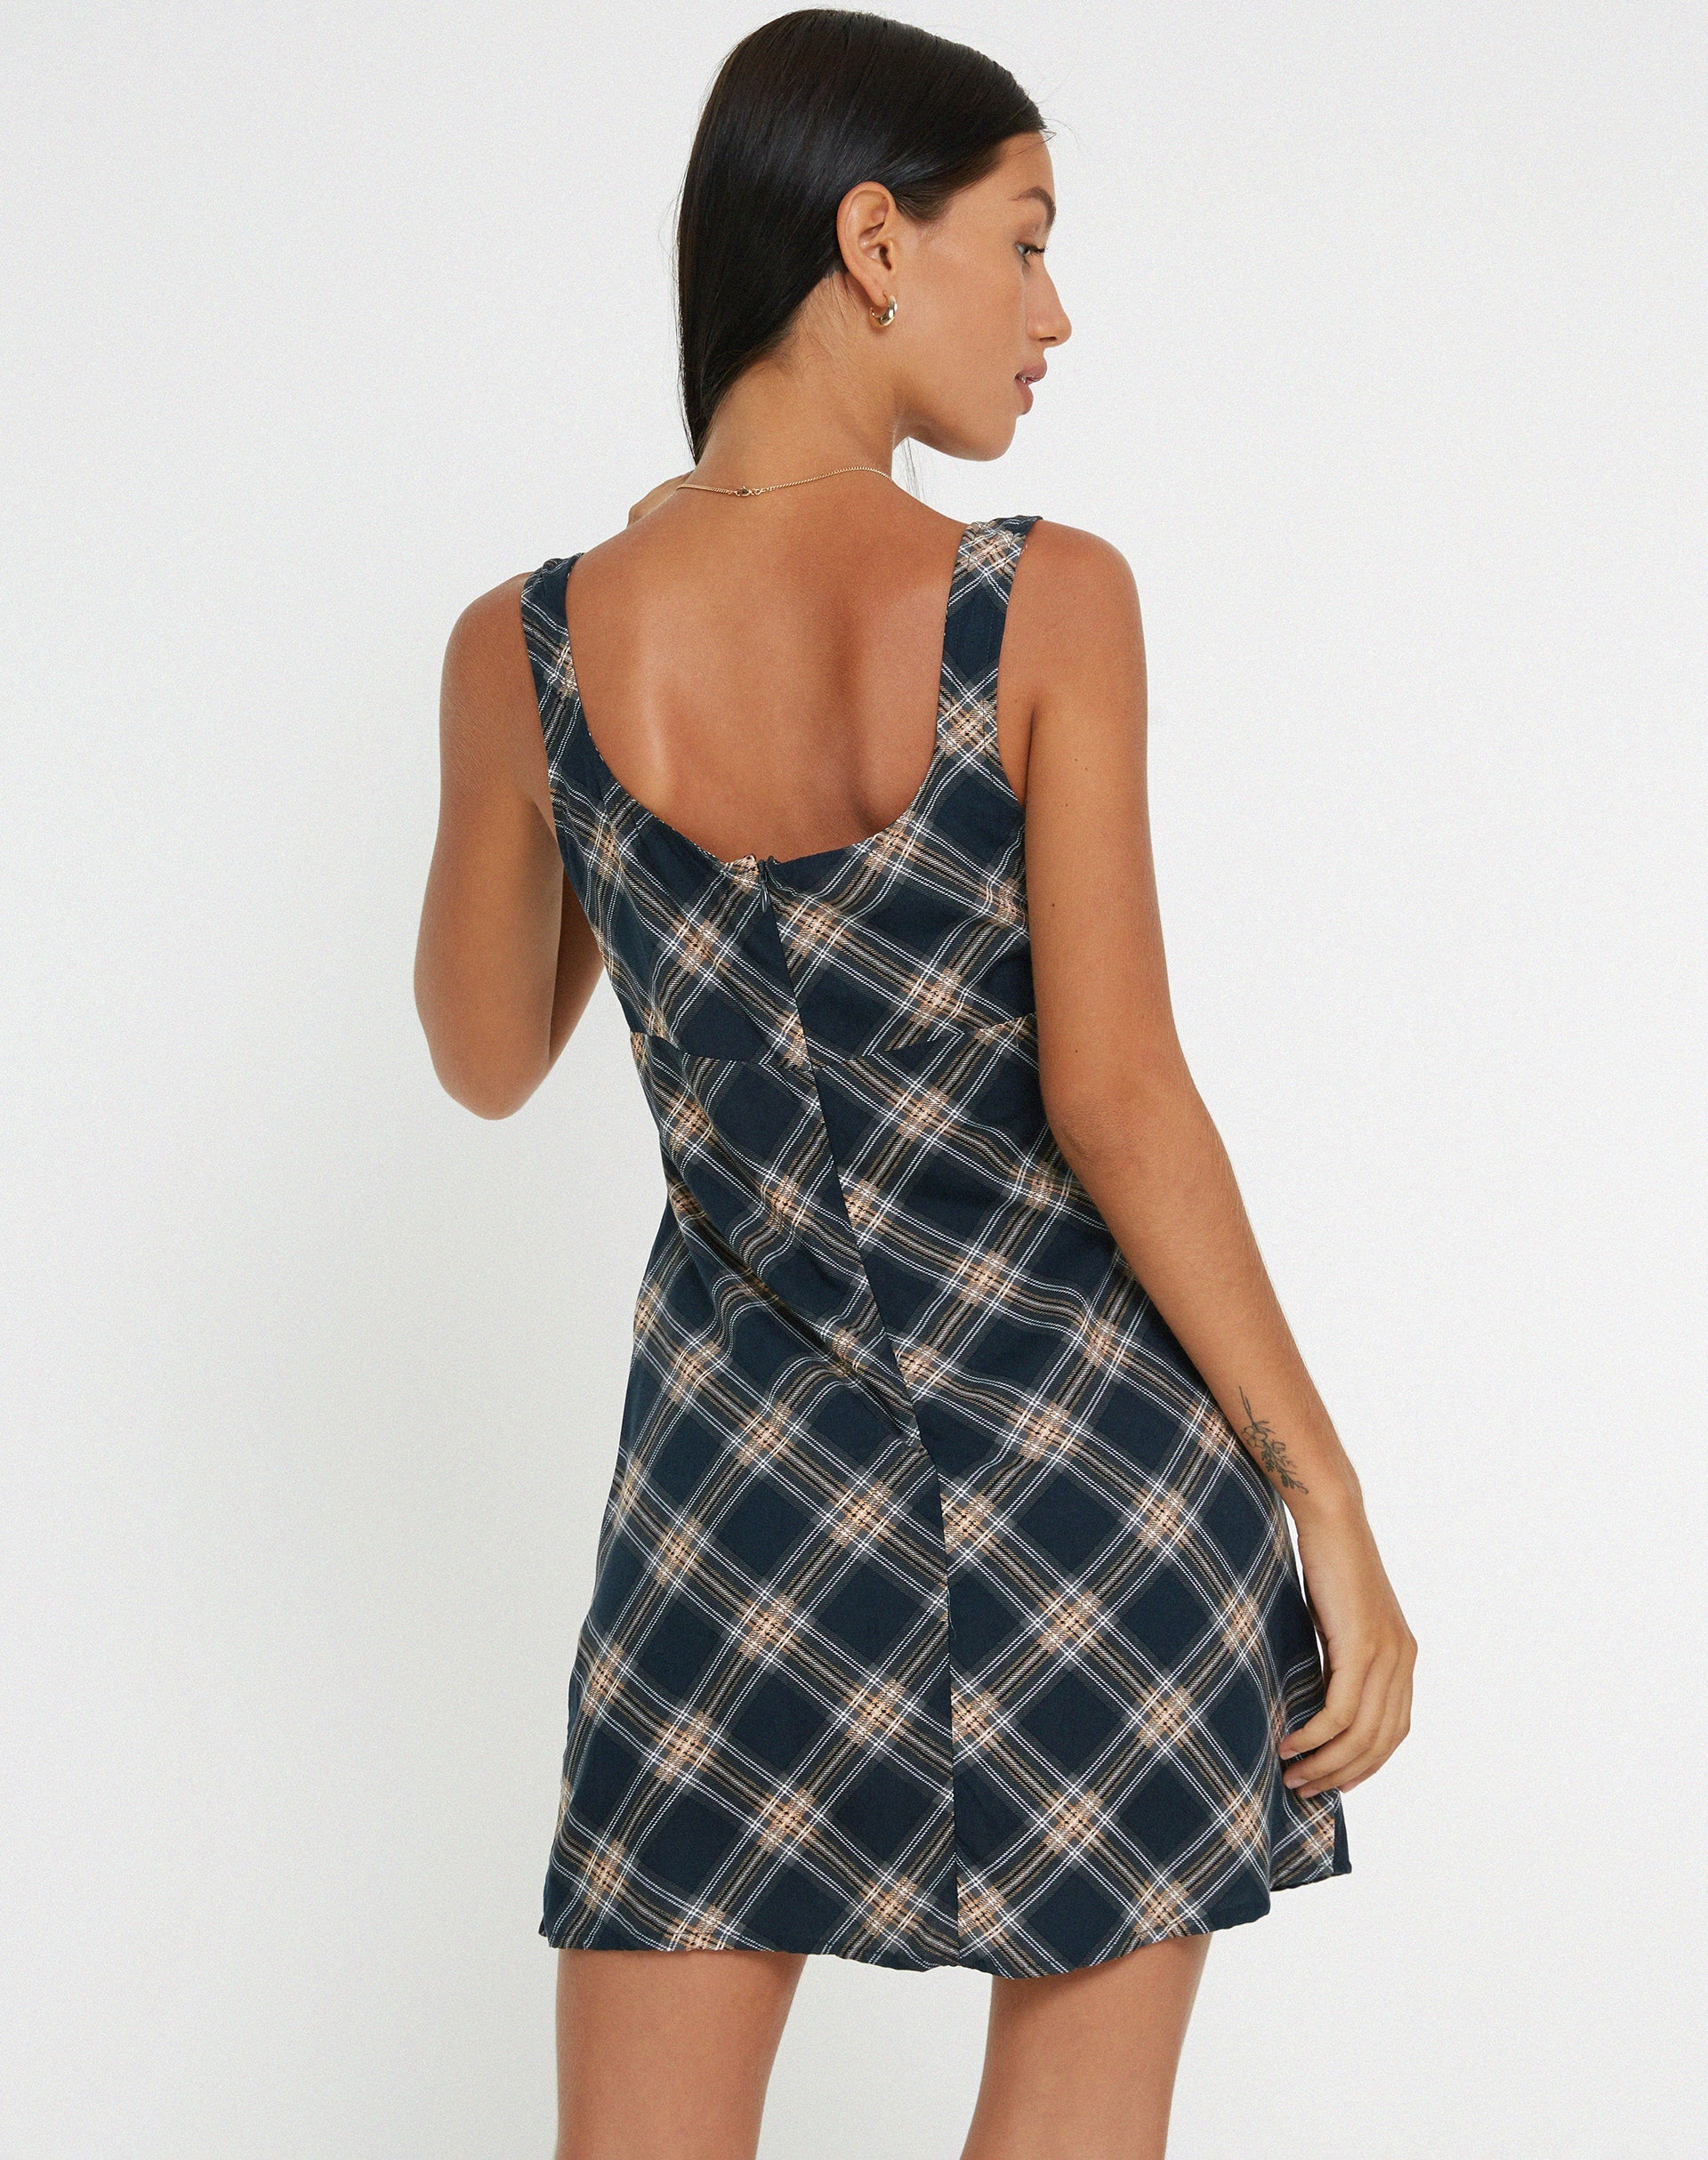 IMAGE OF Mehra Slip Dress in 20's Check Black and Grey